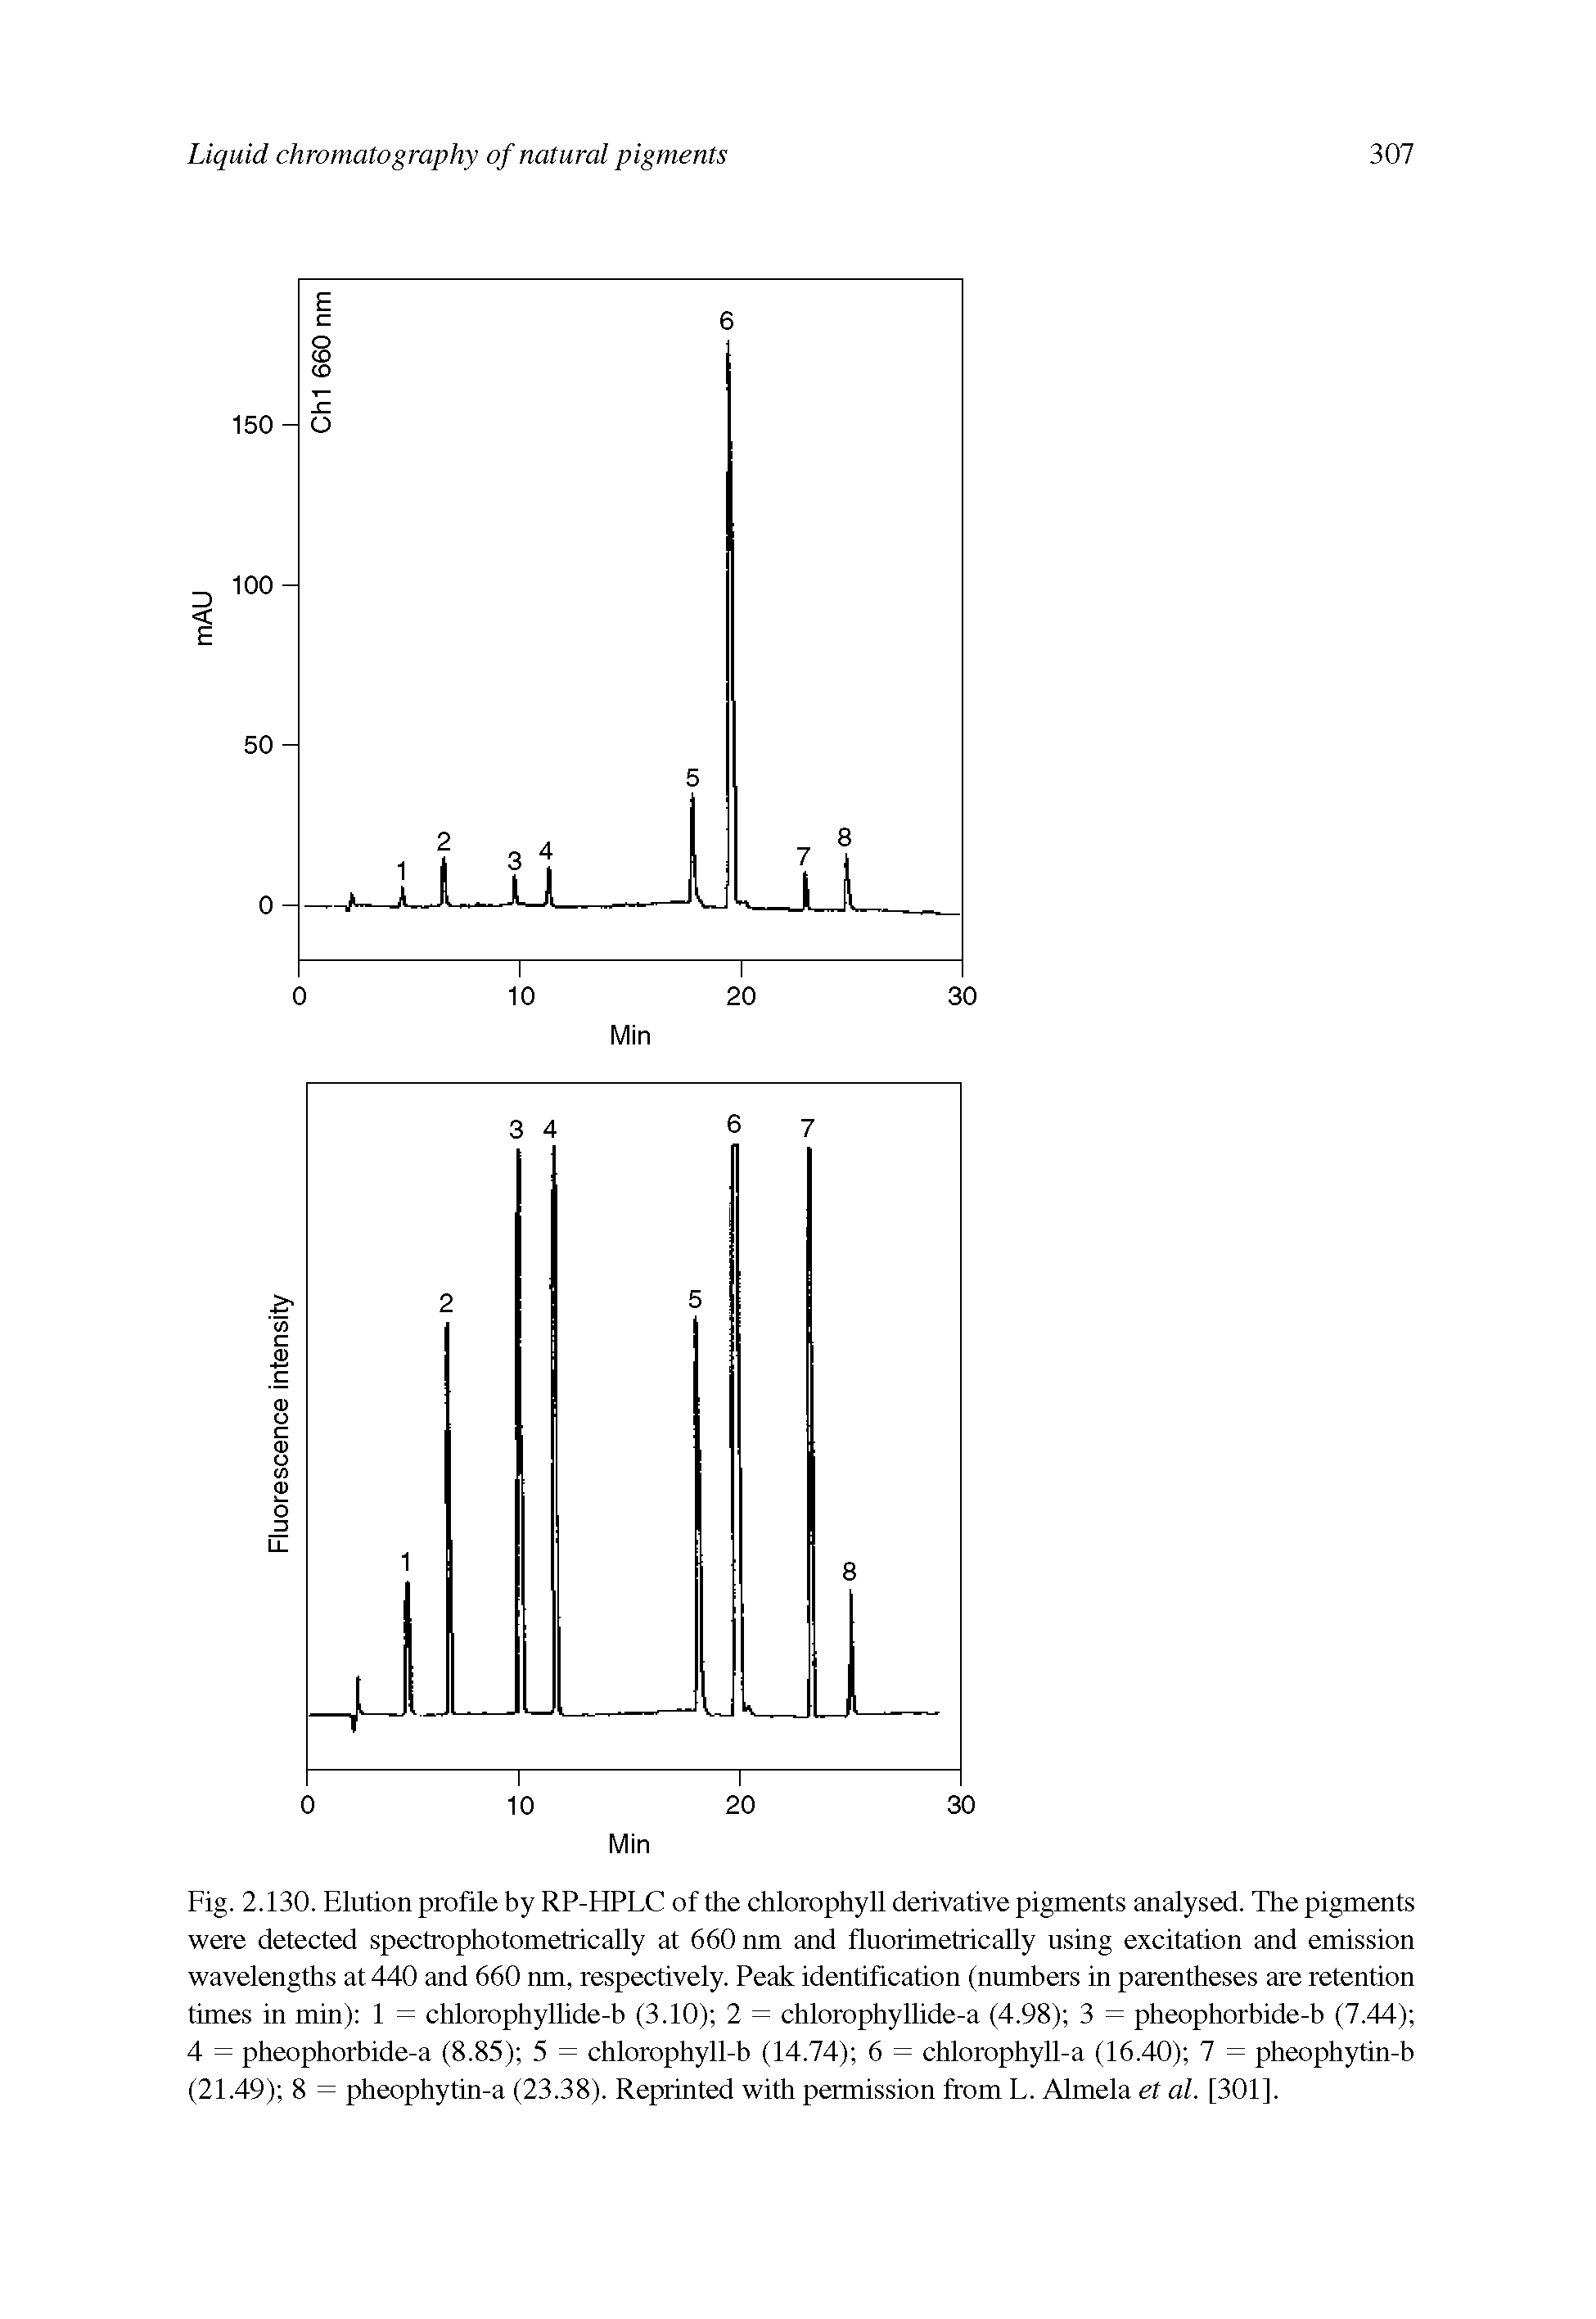 Fig. 2.130. Elution profile by RP-HPLC of the chlorophyll derivative pigments analysed. The pigments were detected spectrophotometrically at 660 nm and fhiorimetrically using excitation and emission wavelengths at 440 and 660 nm, respectively. Peak identification (numbers in parentheses are retention times in min) 1 = chlorophyllide-b (3.10) 2 = chlorophyllide-a (4.98) 3 = pheophorbide-b (7.44) 4 = pheophorbide-a (8.85) 5 = chlorophyll-b (14.74) 6 = chlorophyll-a (16.40) 7 = pheophytin-b (21.49) 8 = pheophytin-a (23.38). Reprinted with permission from L. Almela et al. [301].